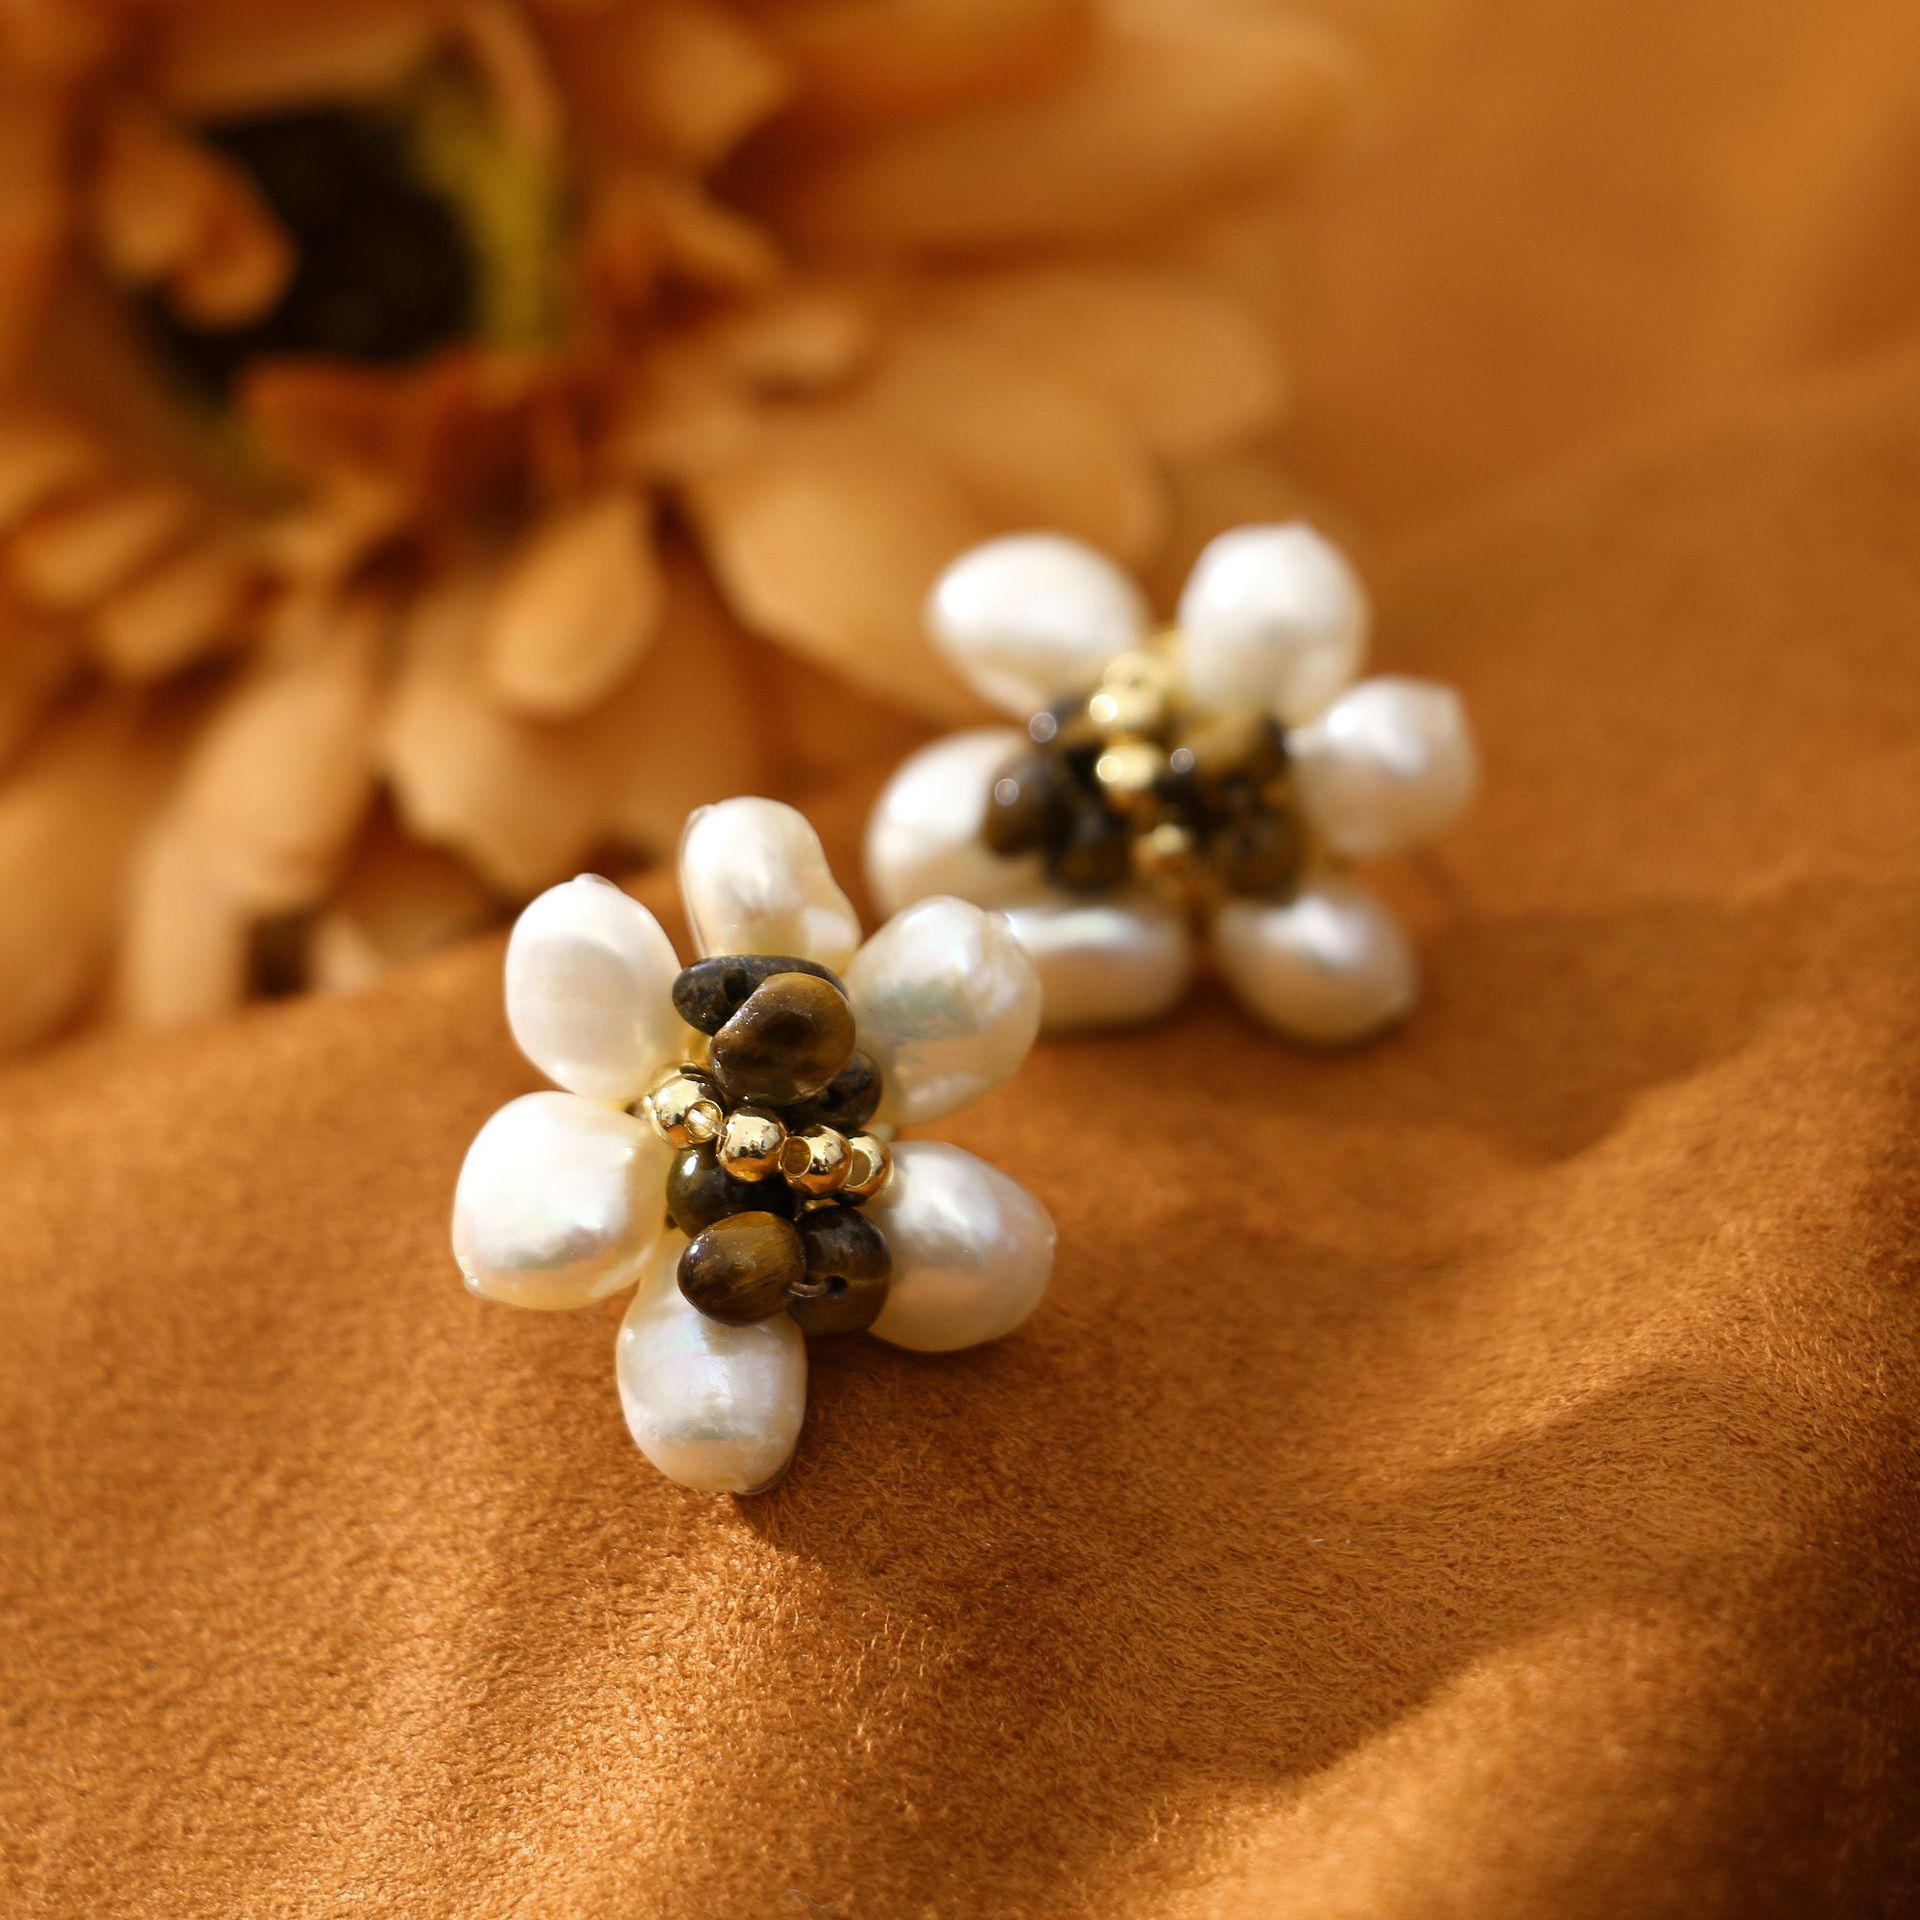 Hand-Woven Tigereye Stud Earrings Fresh Water Pearl Earrings Retro High Sense Temperament Entry Lux Autumn and Winter Special-Interest Earrings